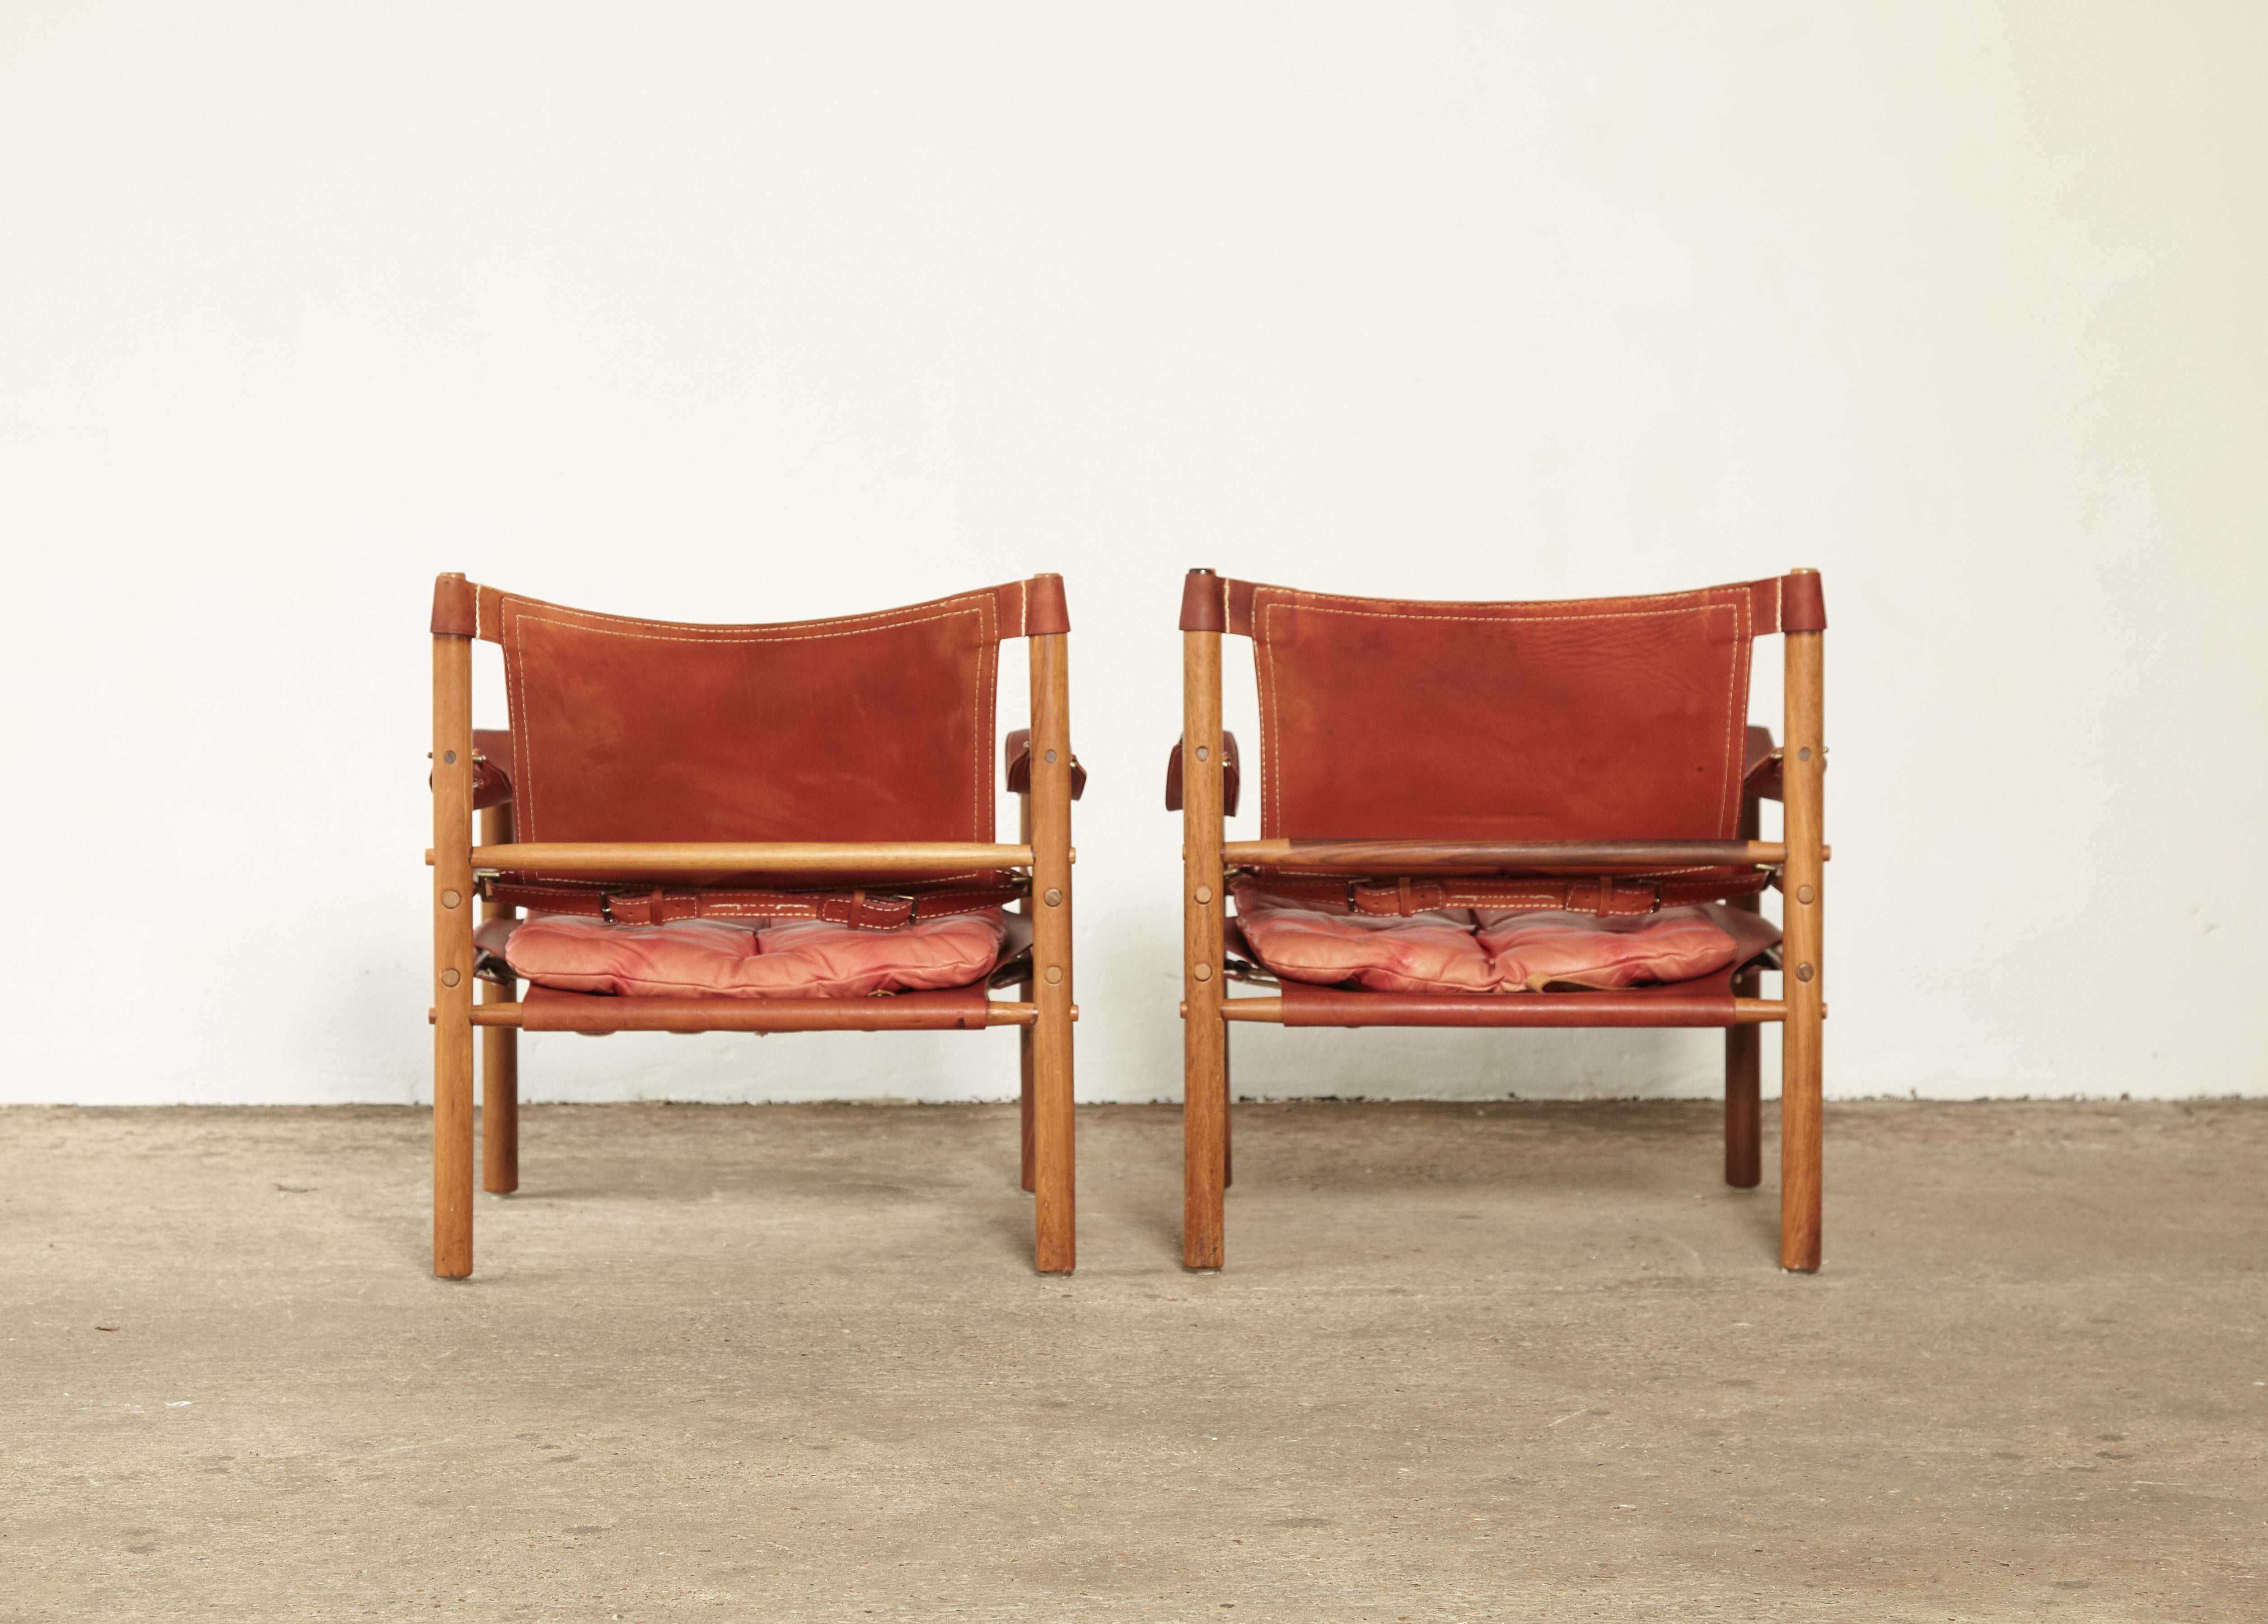 20th Century Arne Norell Rosewood and Leather Safari Sirocco Chairs, Sweden, 1960s